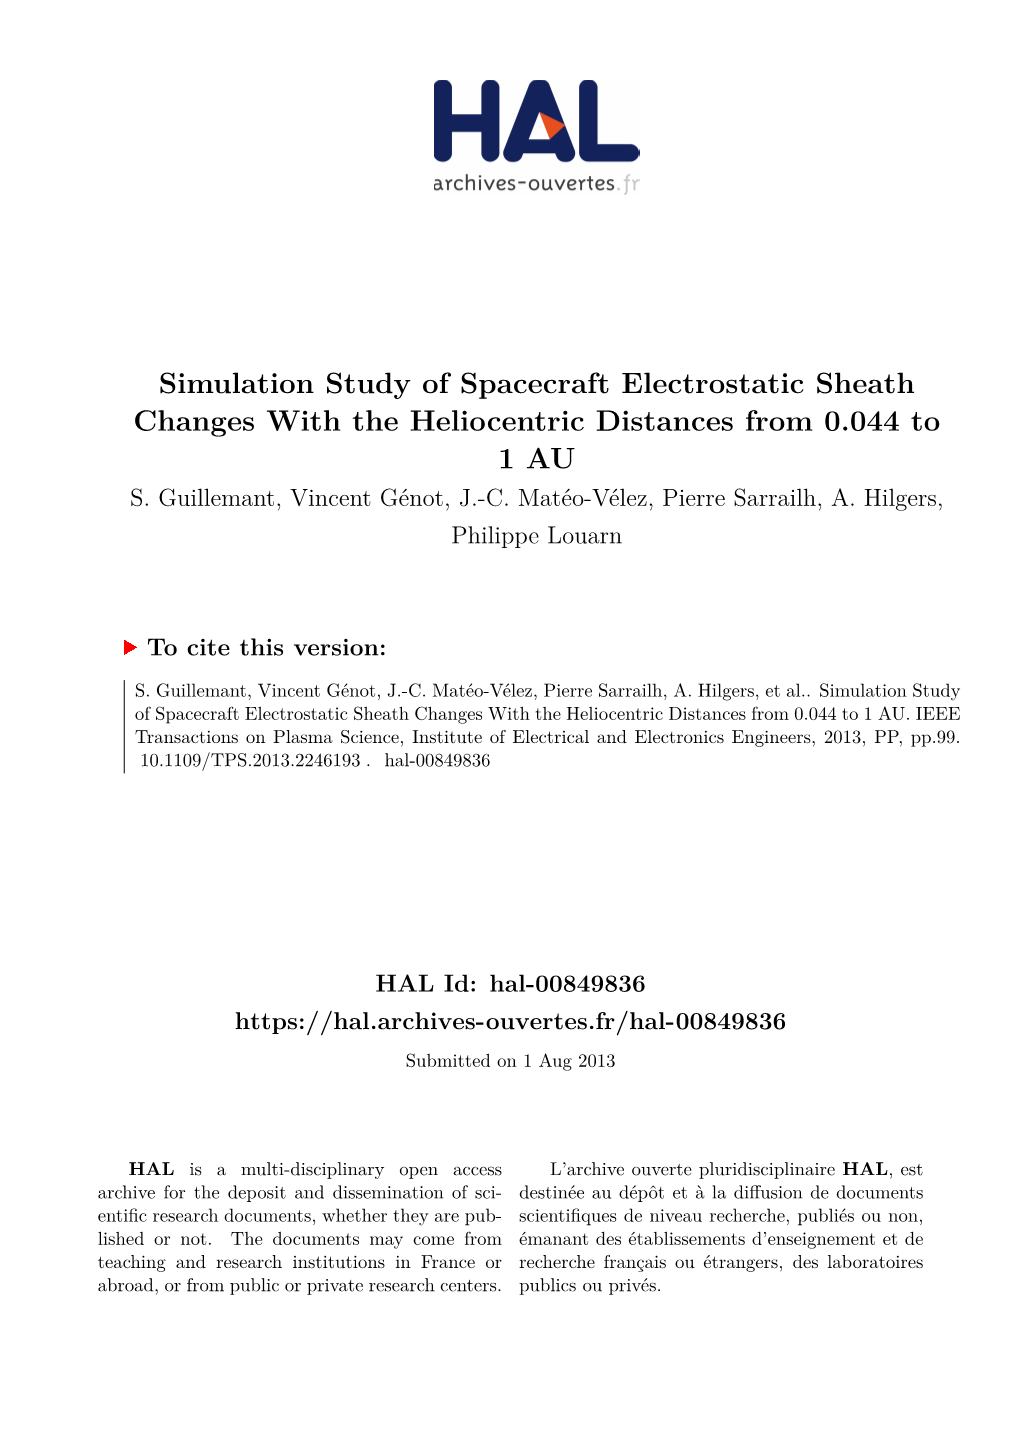 Simulation Study of Spacecraft Electrostatic Sheath Changes with the Heliocentric Distances from 0.044 to 1 AU S